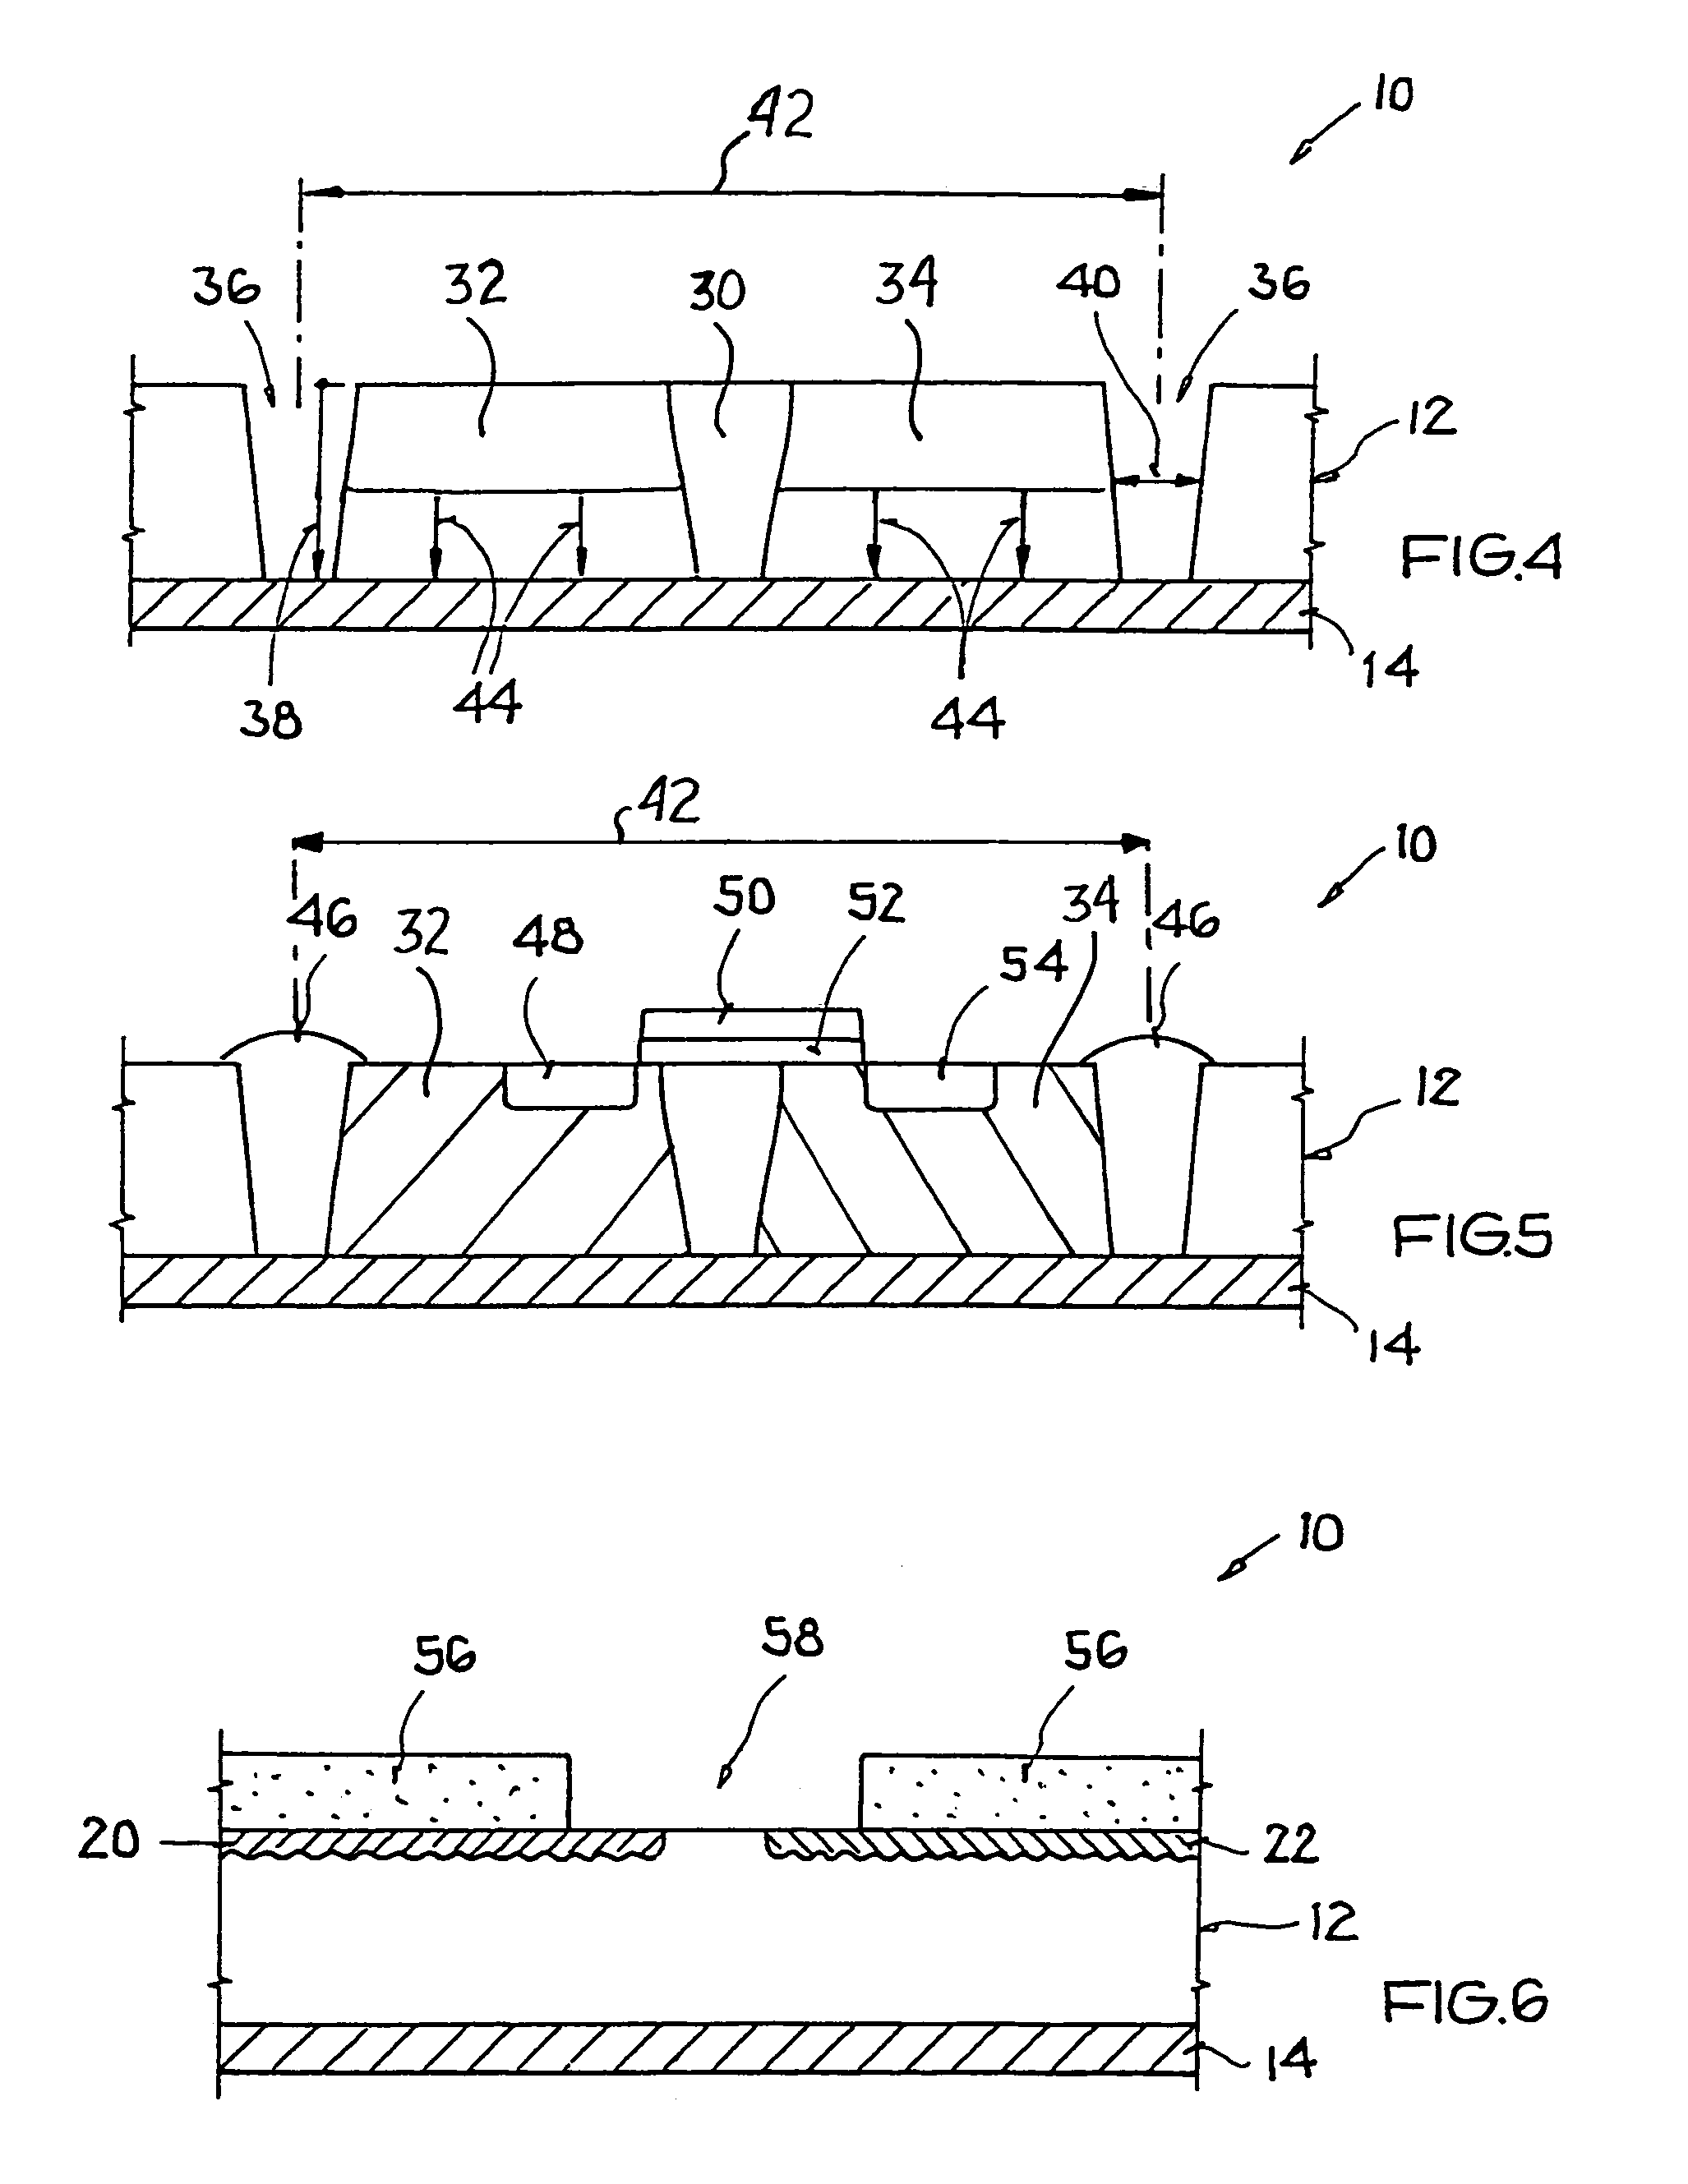 Method of fabricating semiconductor components through implantation and diffusion in a semiconductor substrate